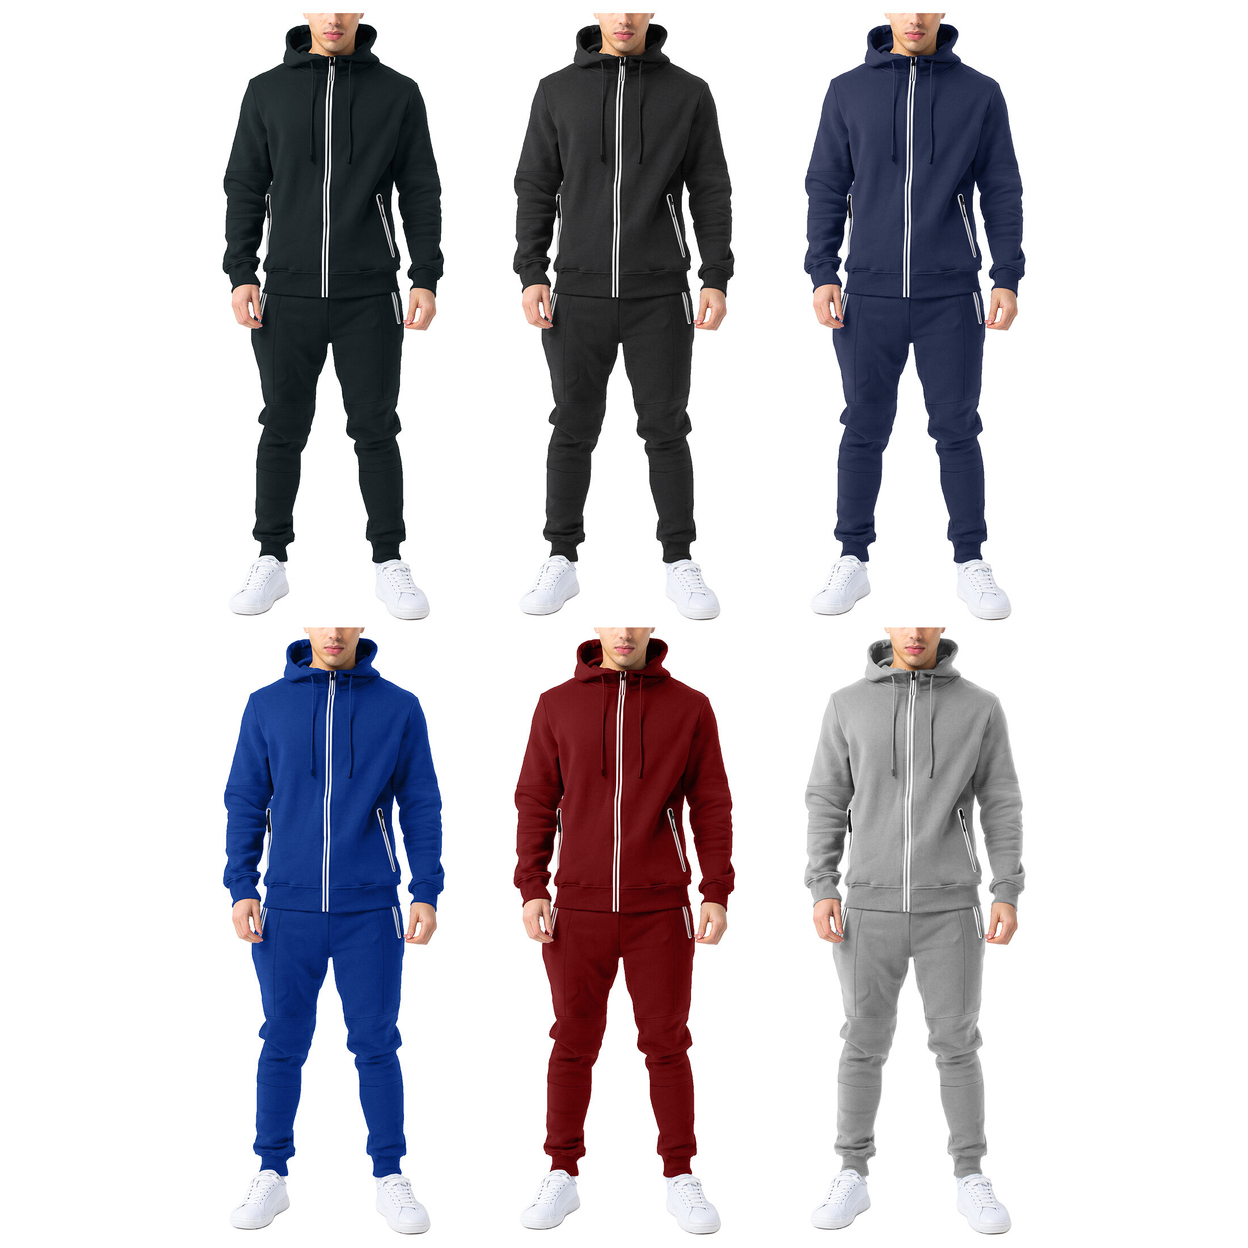 2-Pack: Men's Cozy Slim Fit Active Athletic Full Zip Hoodie And Jogger Tracksuit - Black & Blue, Small